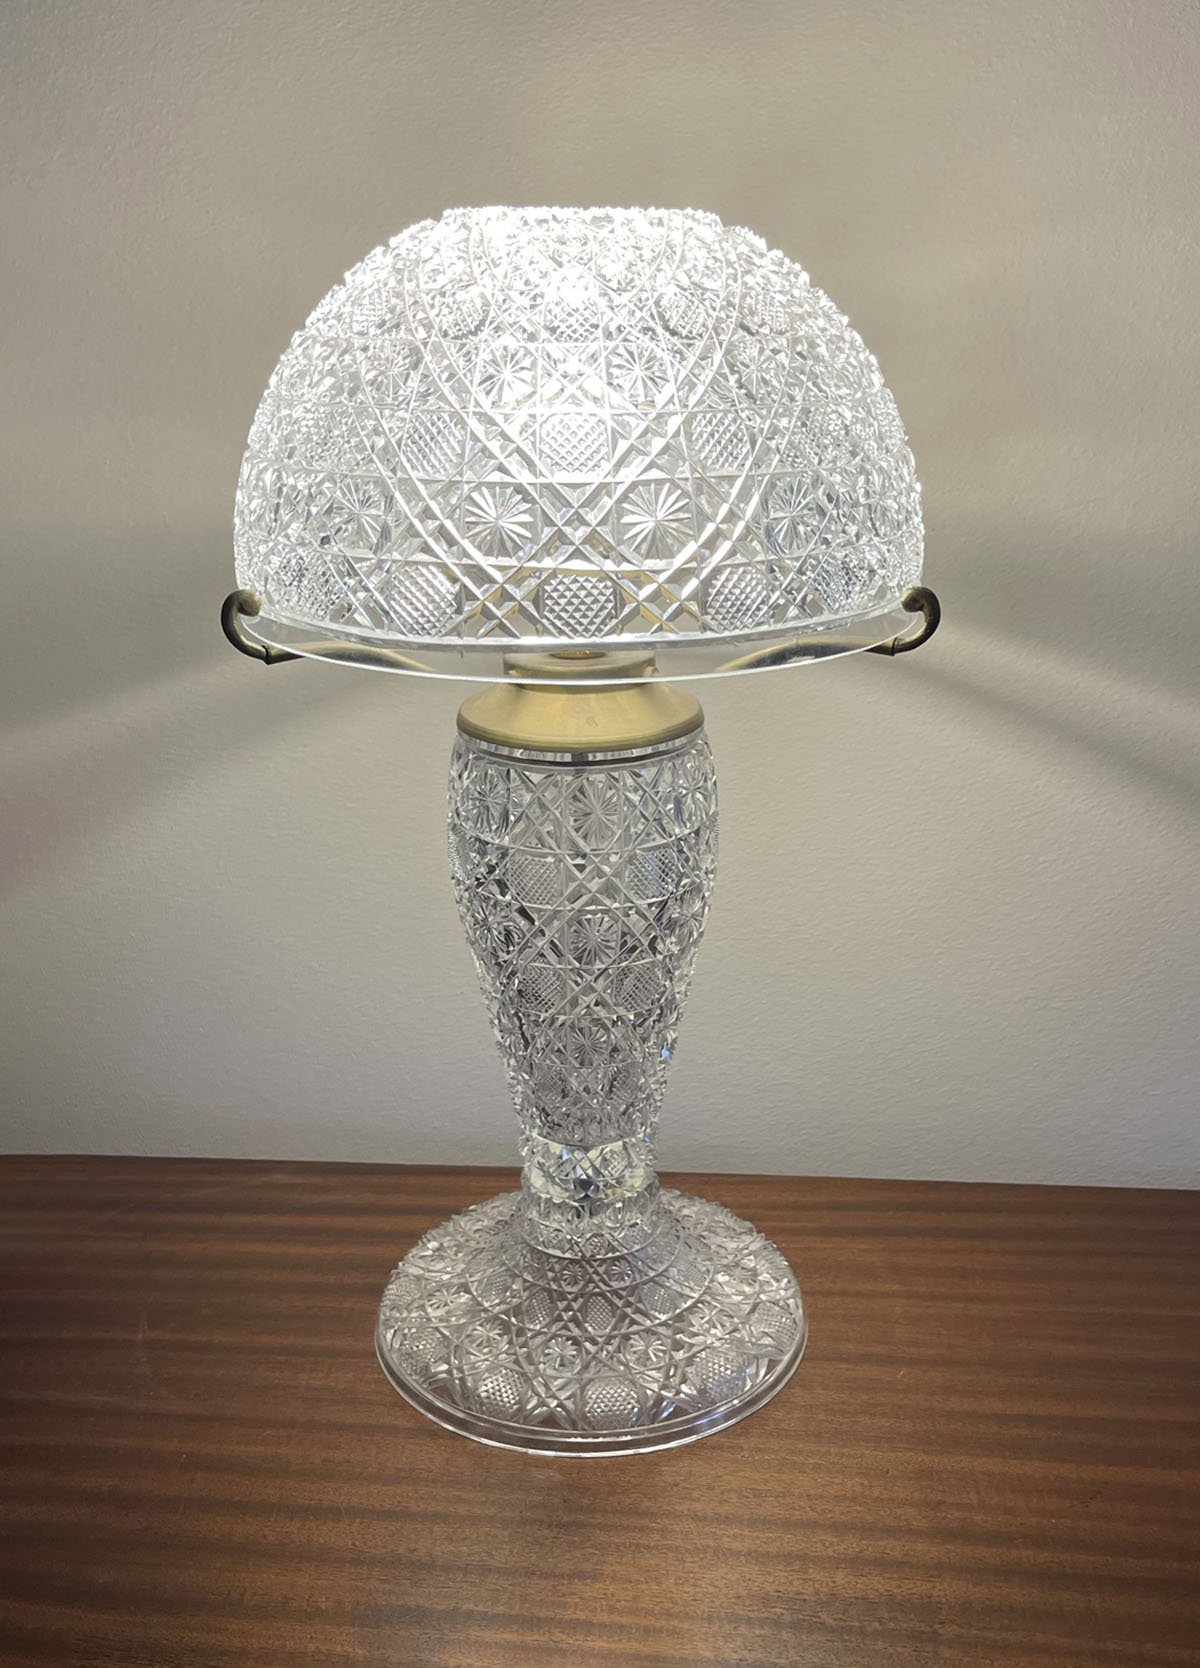 LARGE STATELY CUT GLASS TABLE LAMP: